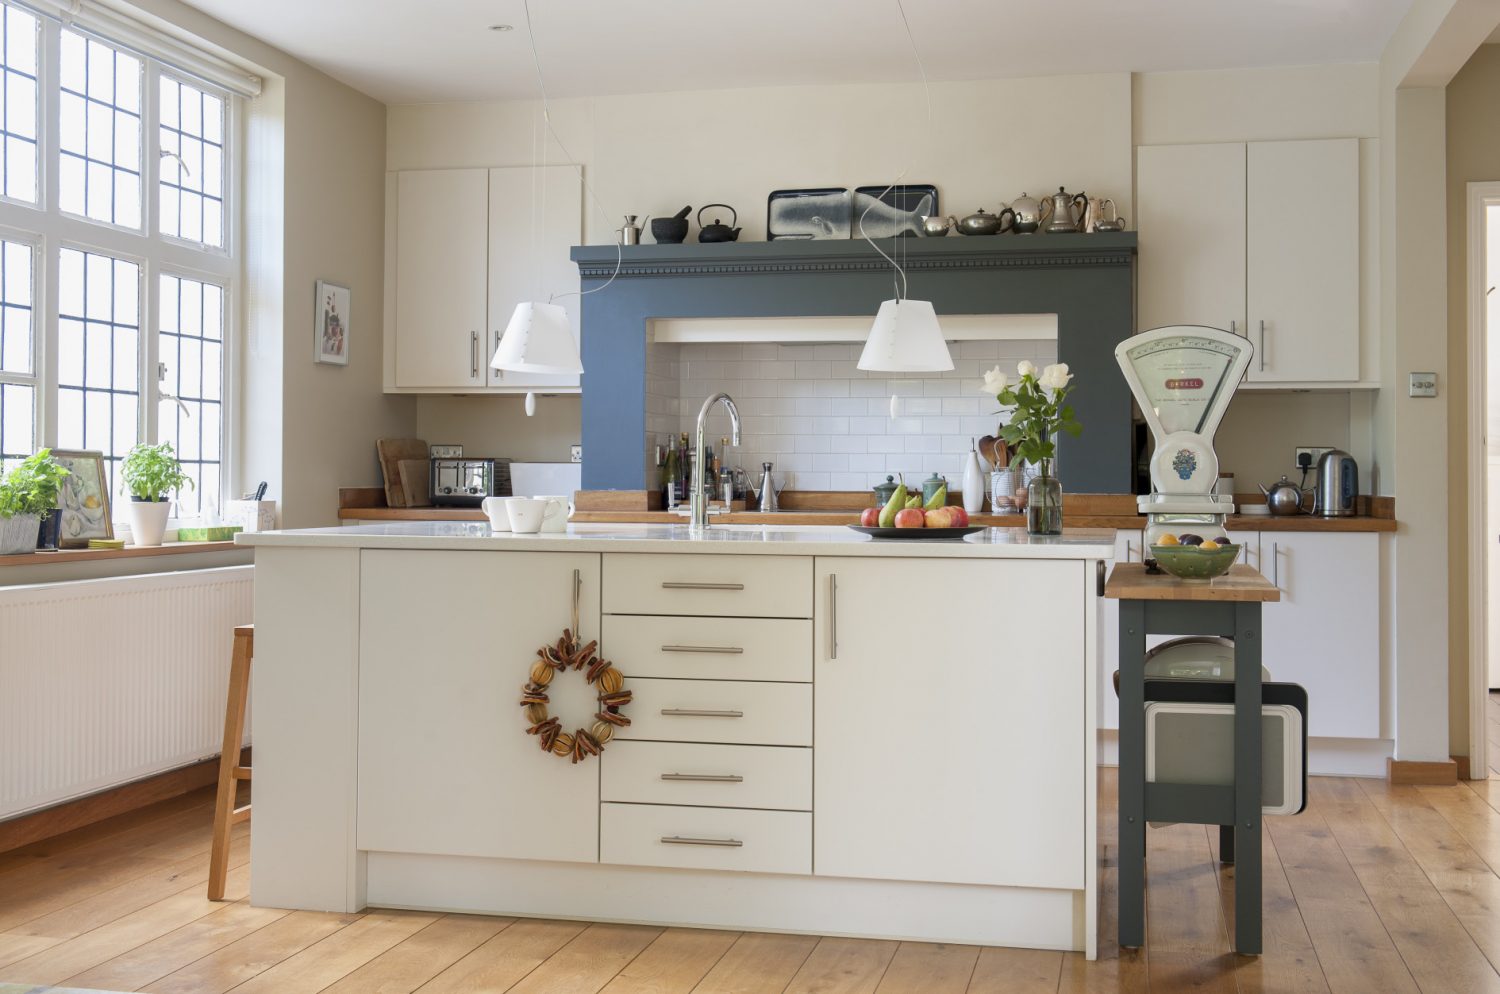 The kitchen is dominated by a free-standing unit painted in Farrow & Ball Slipper White. Featuring big and bold is a magnificent set of scales